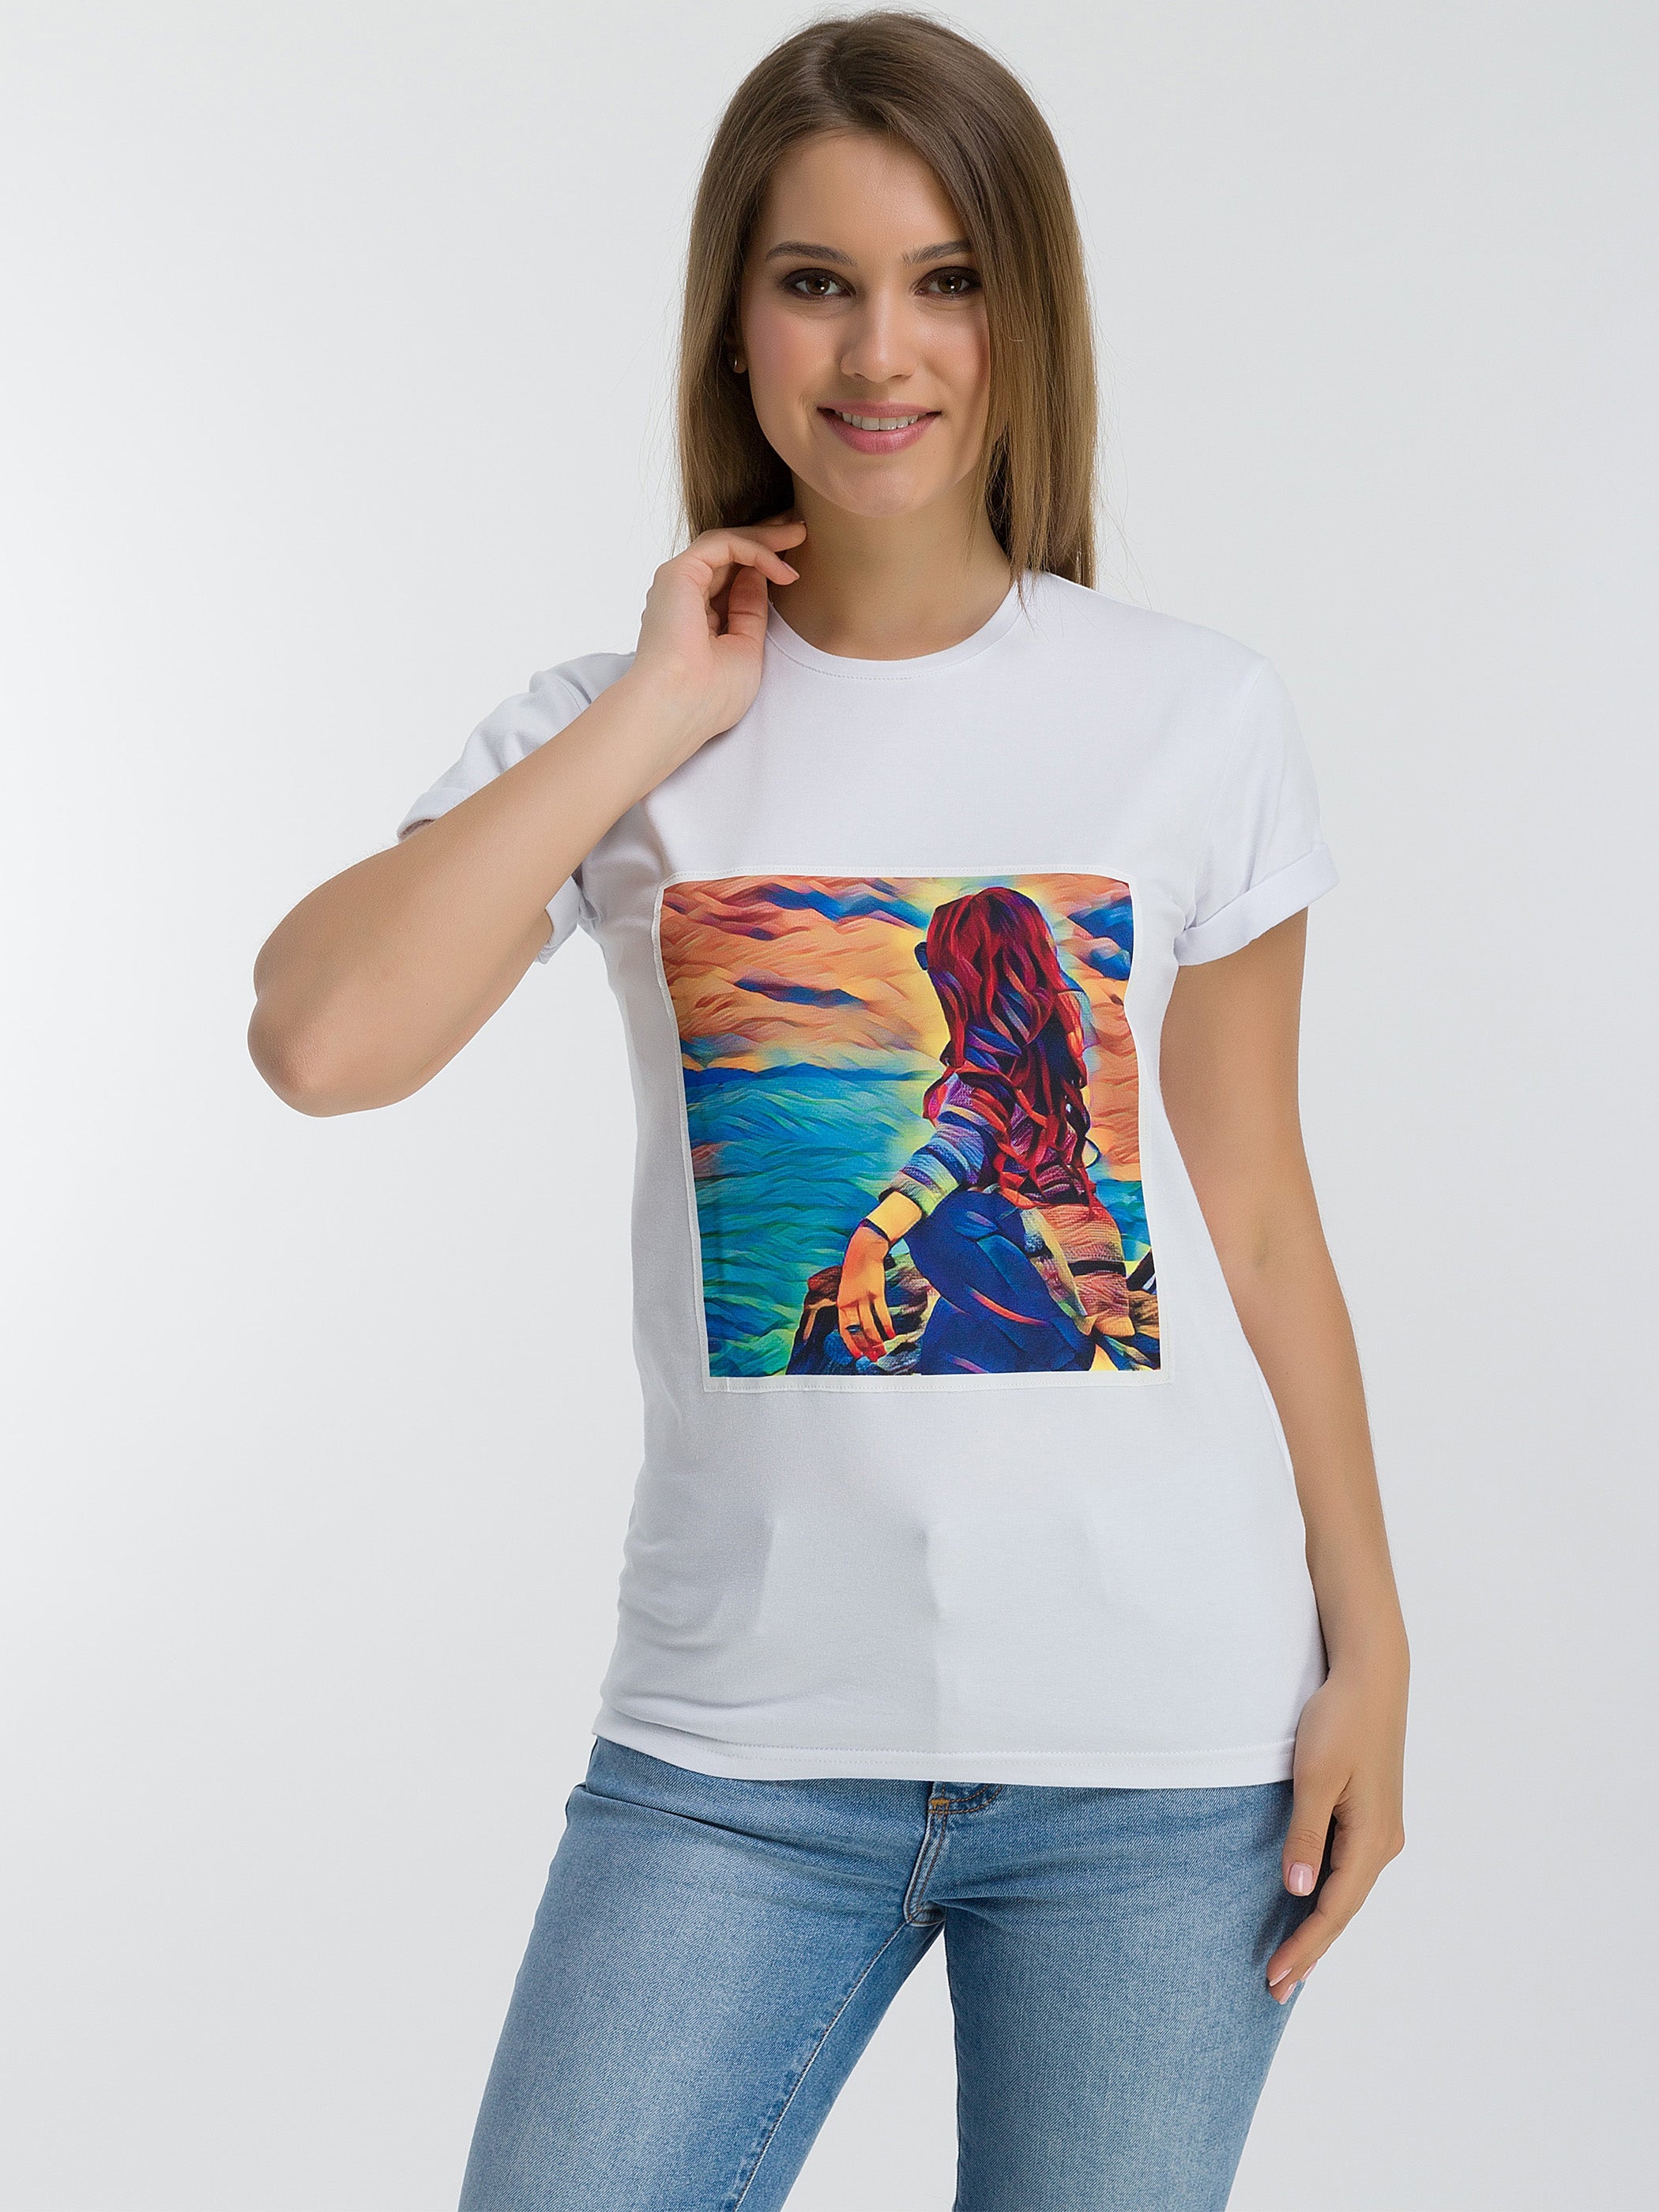 T-Shirt "The Girl by Lake Sevan" by AG Sisters